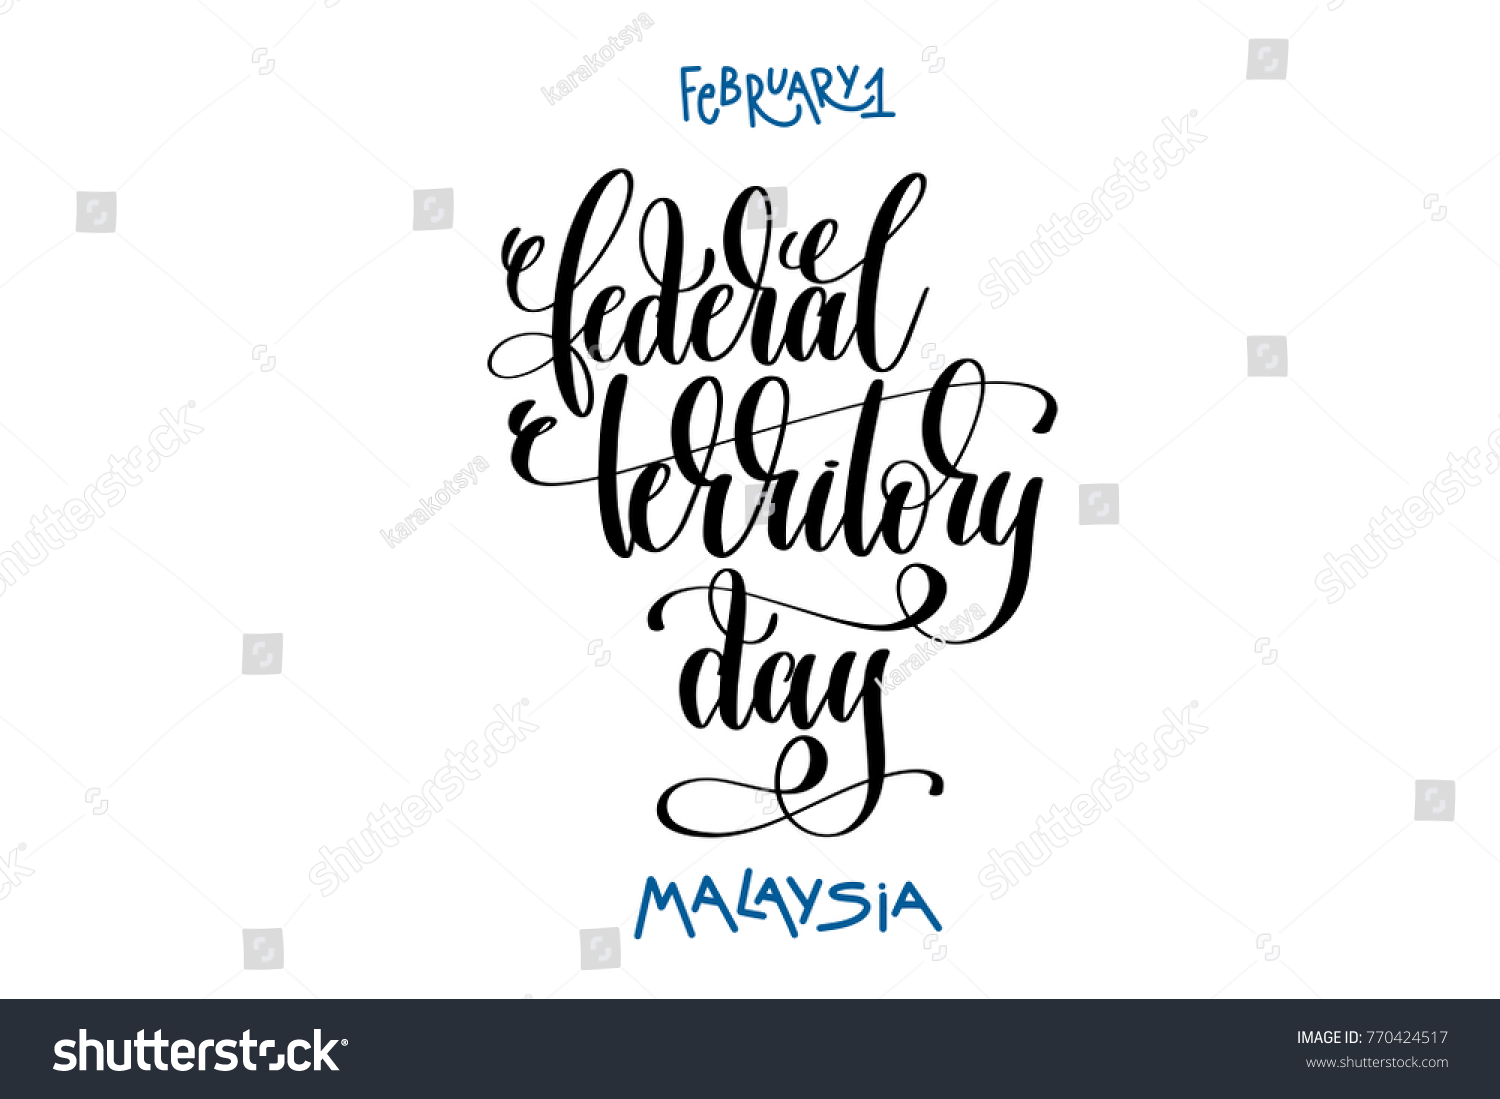 Federal territory holiday